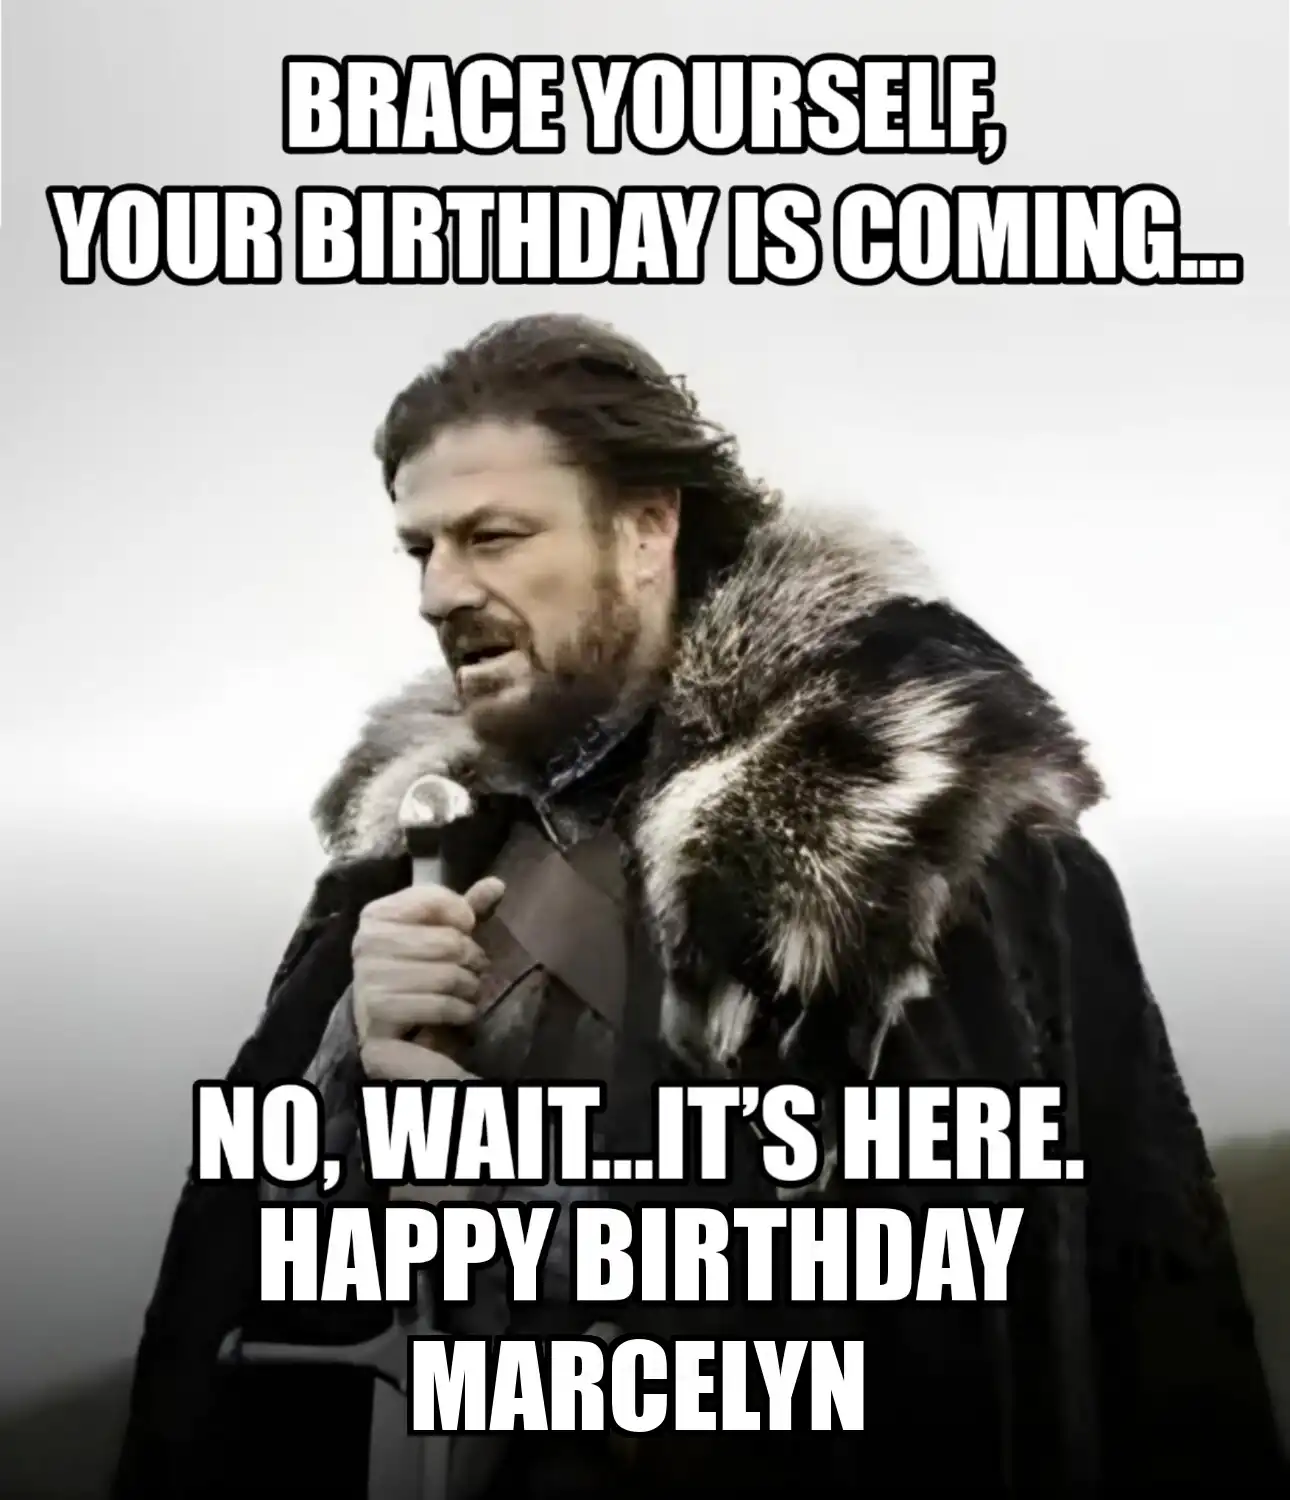 Happy Birthday Marcelyn Brace Yourself Your Birthday Is Coming Meme